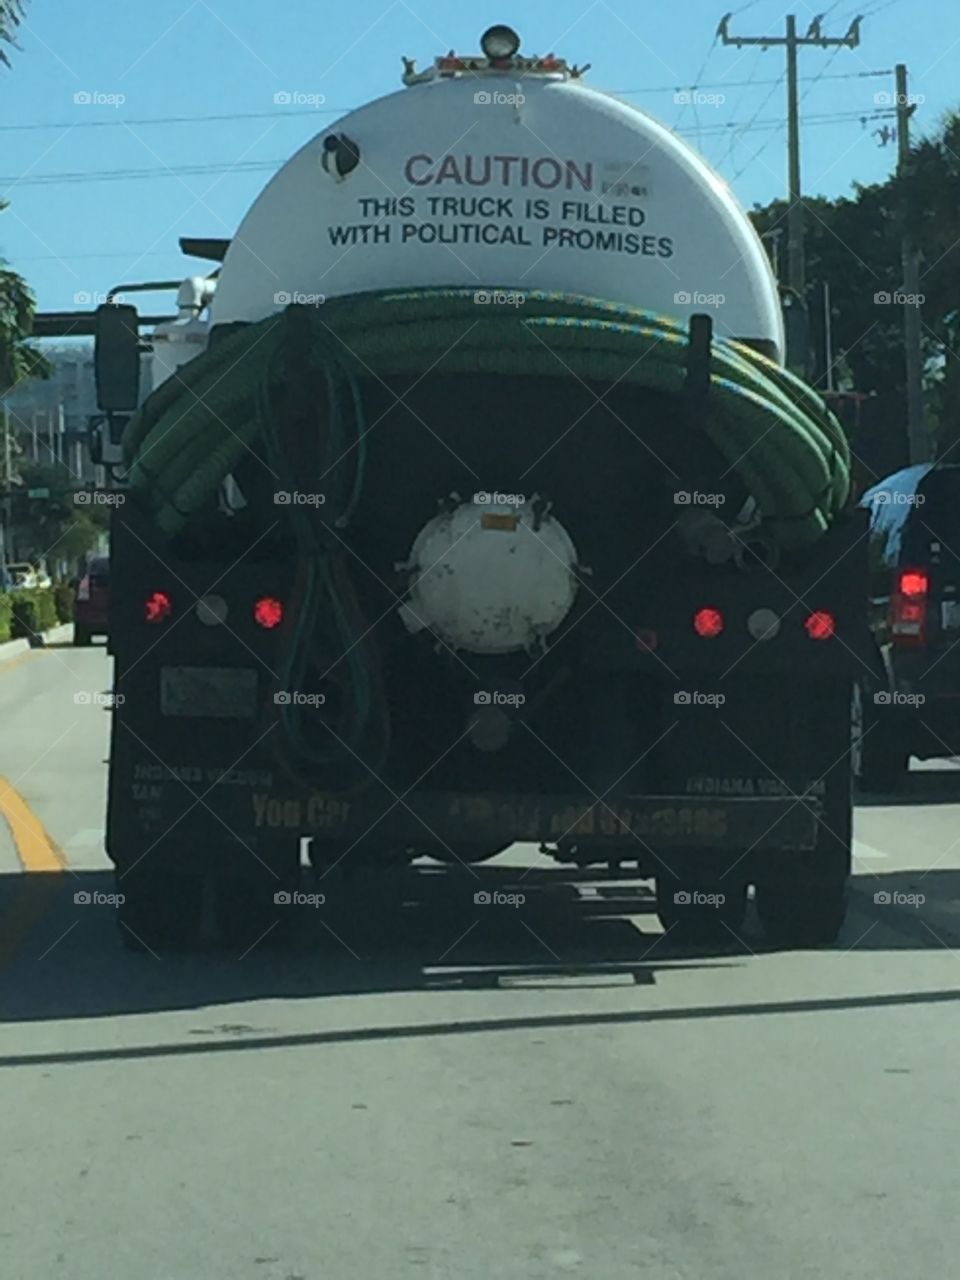 SANITATION TRUCK WITH A POLITICAL MESSAGE